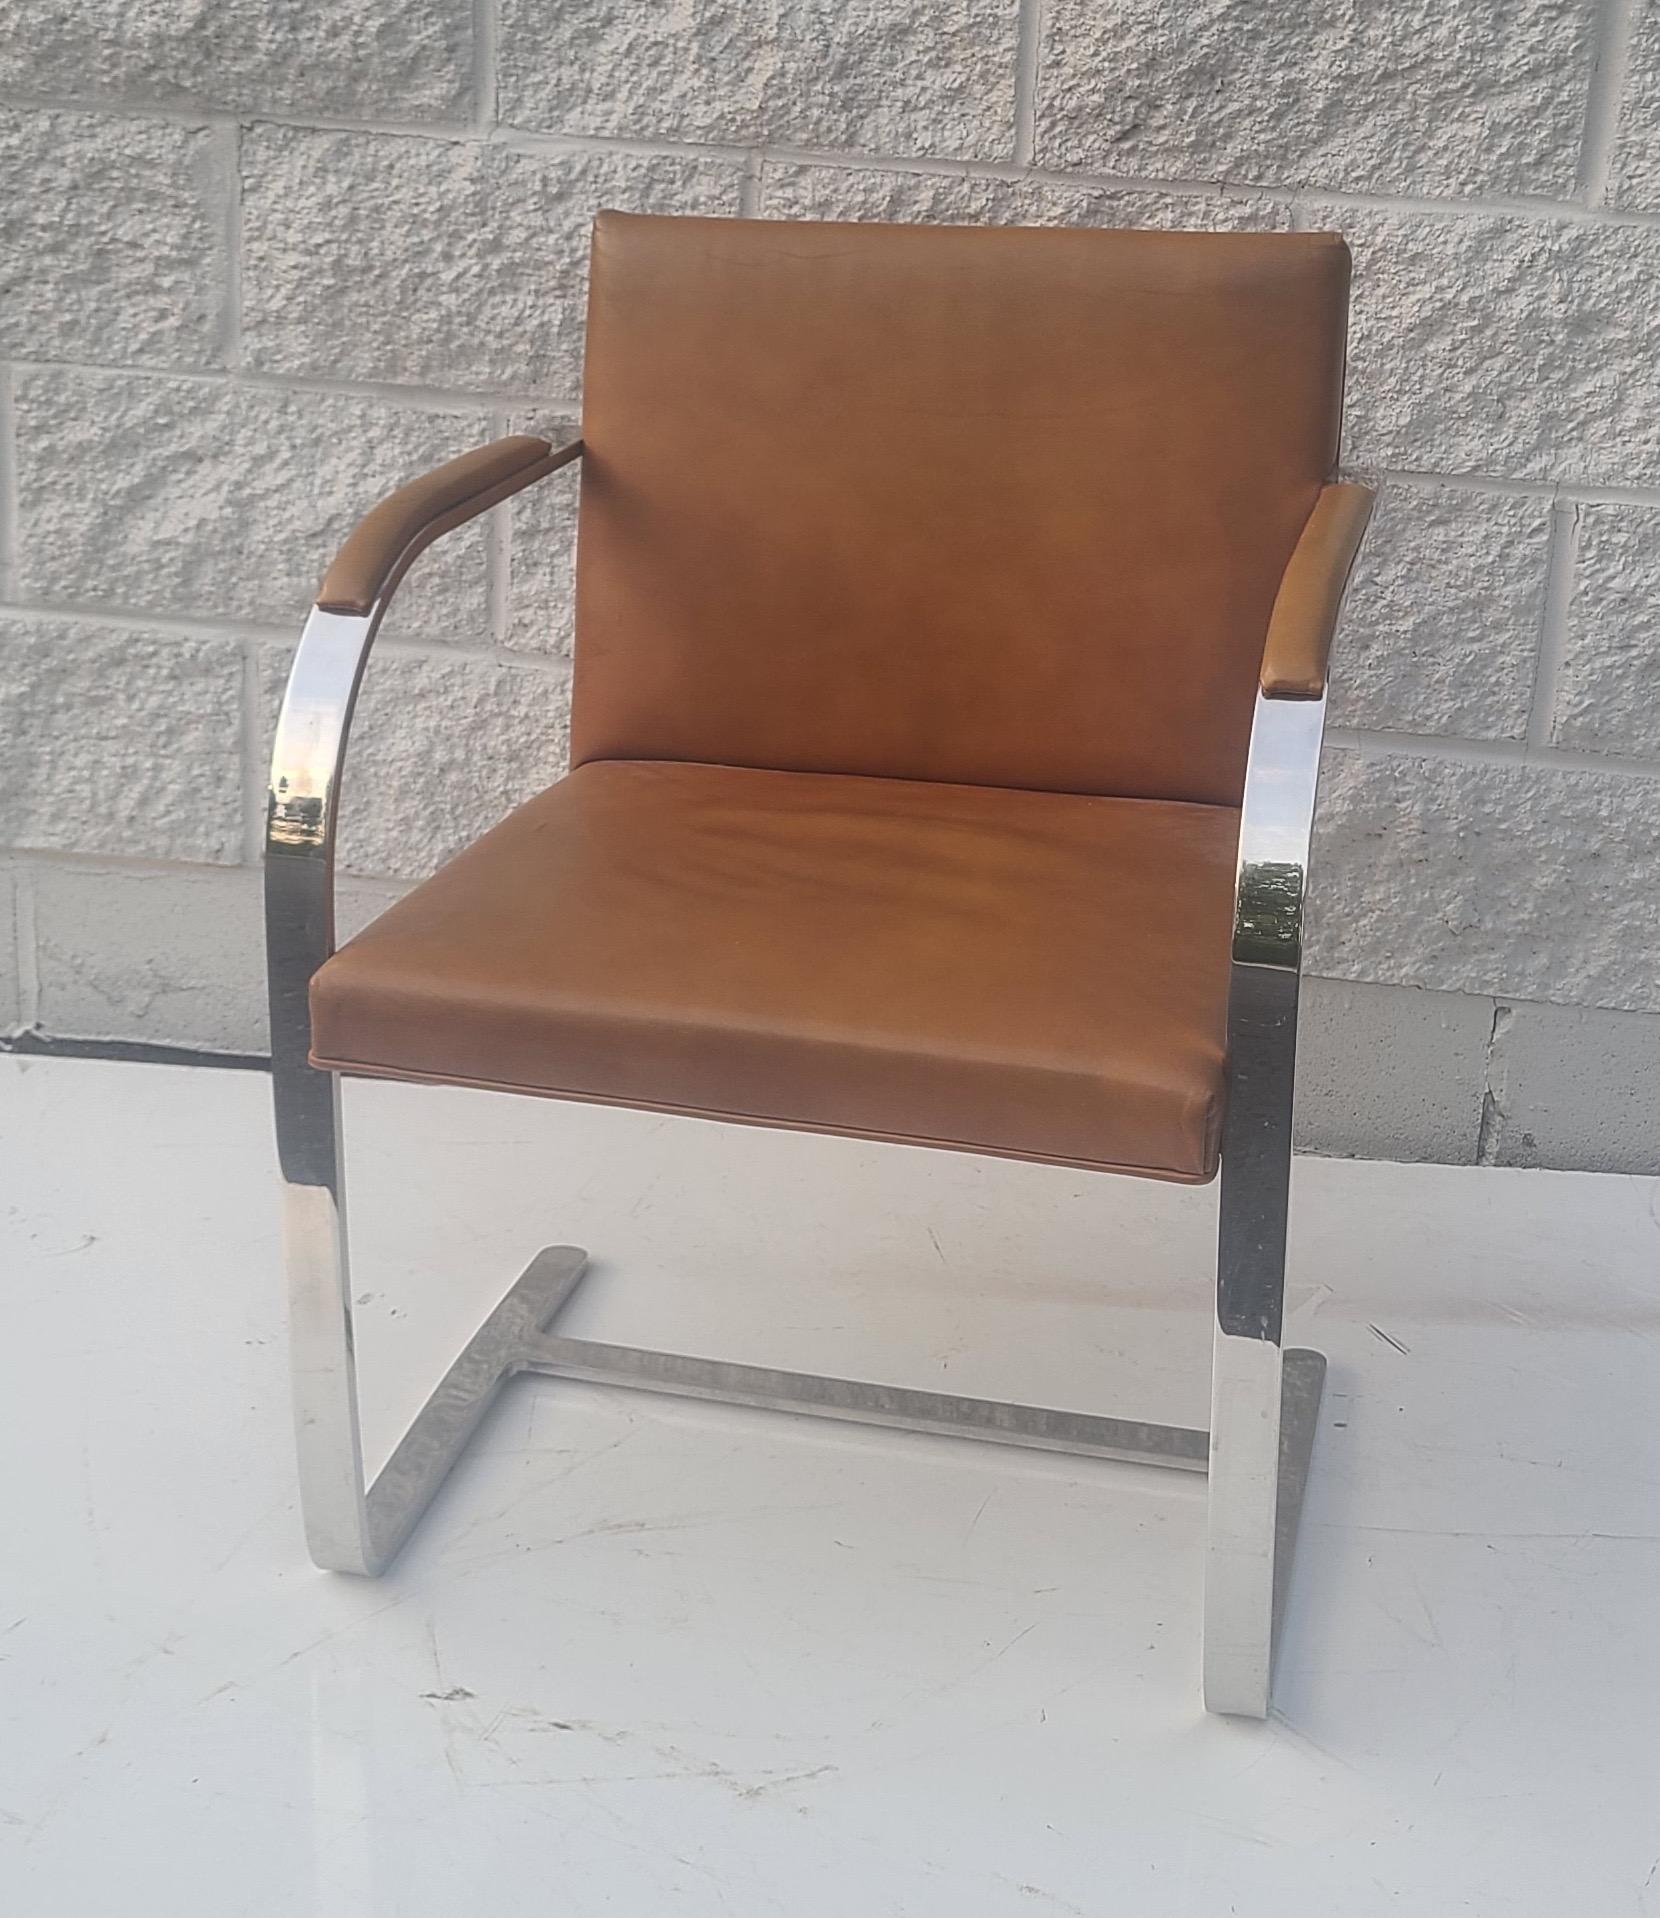 Late 20th Century Brno Chair Ludwig Mies van der Rohe in Congac Leather Brueton